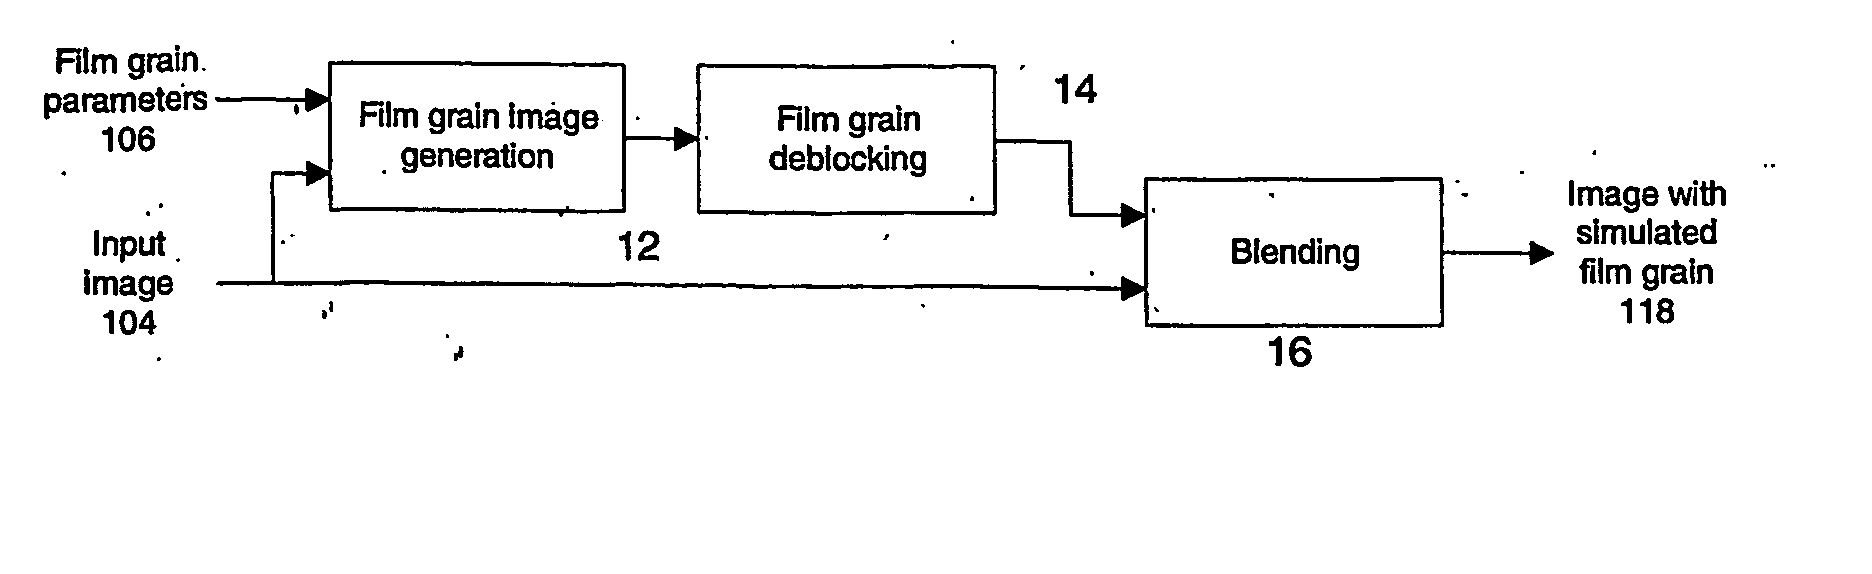 Technique for simulating film grain using frequency filtering